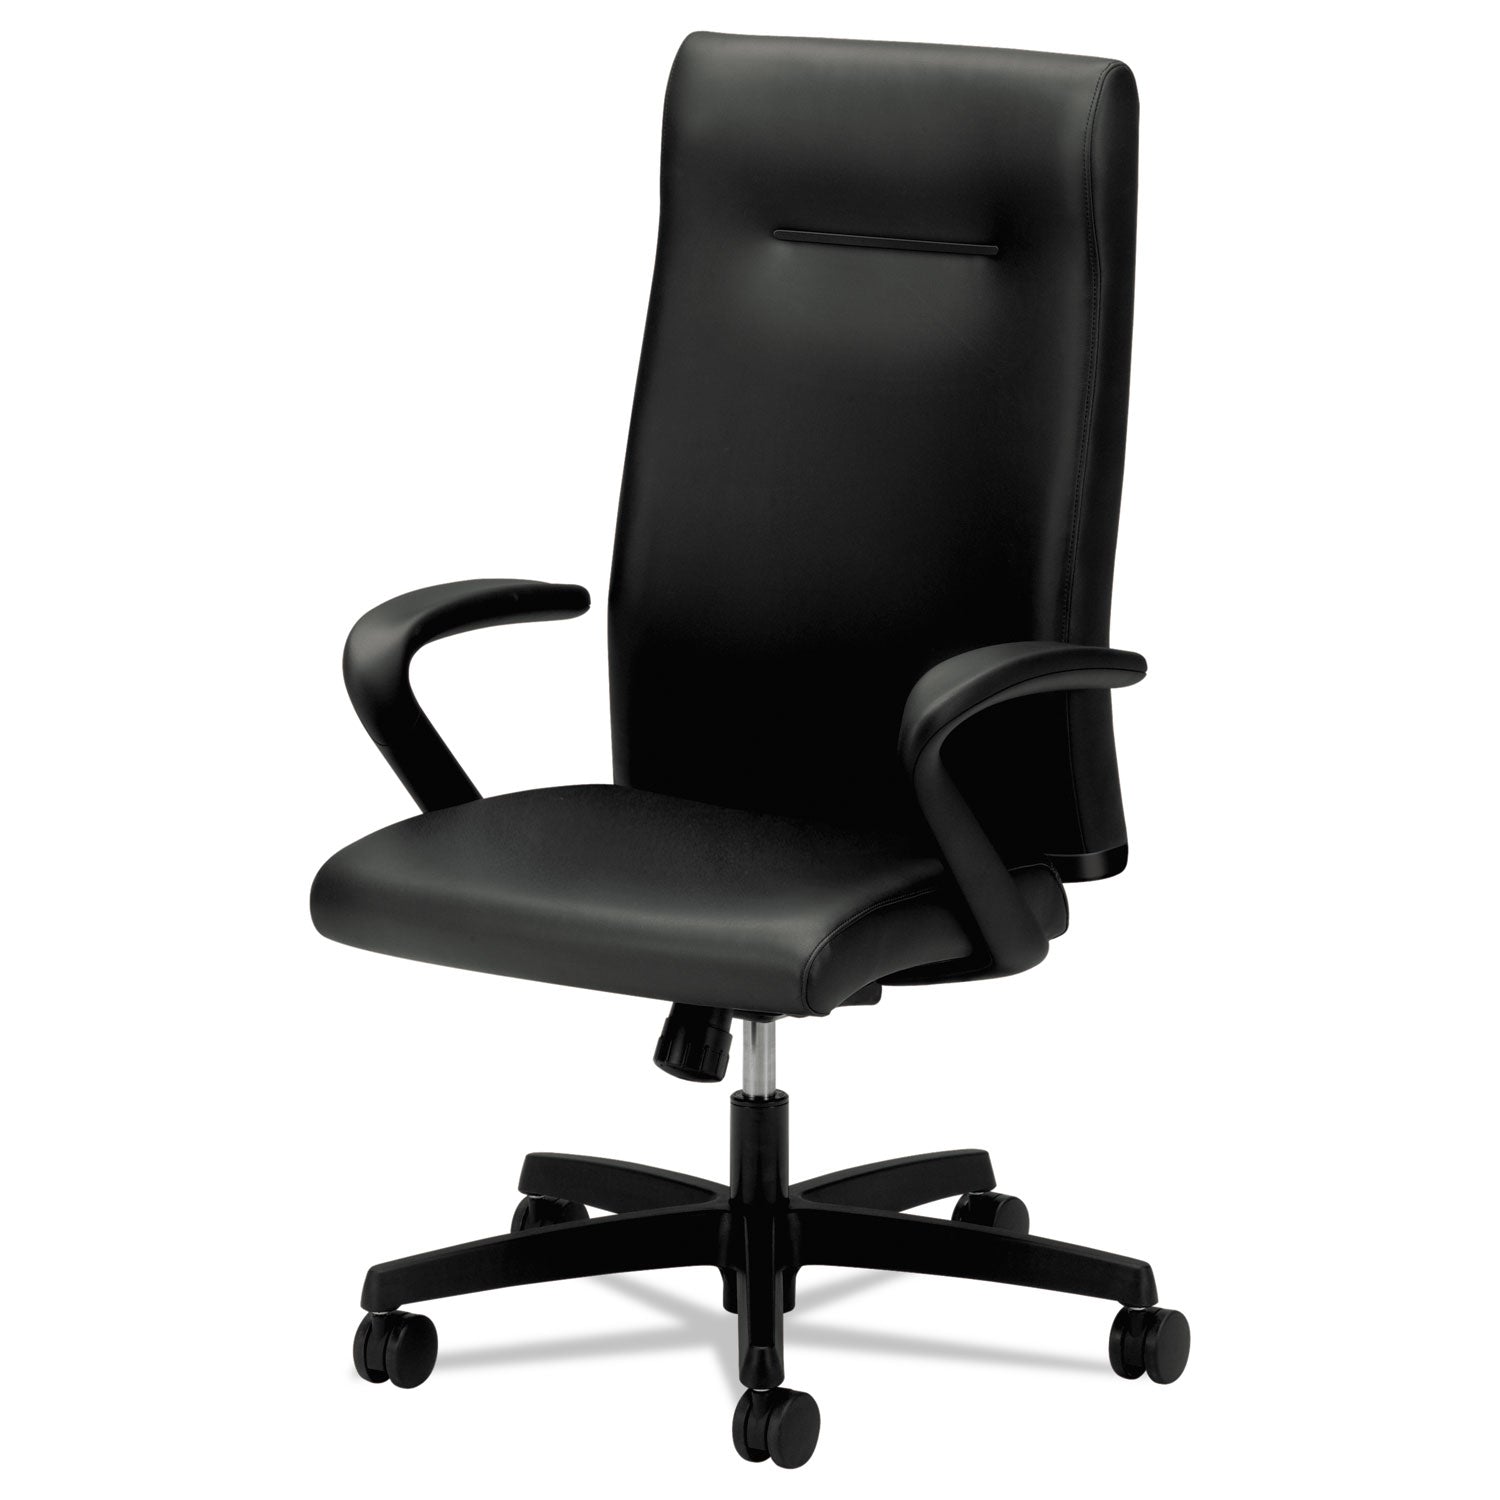 Ignition Series Executive High-Back Chair, Supports Up to 300 lb, 17.38" to 21.88" Seat Height, Black - 